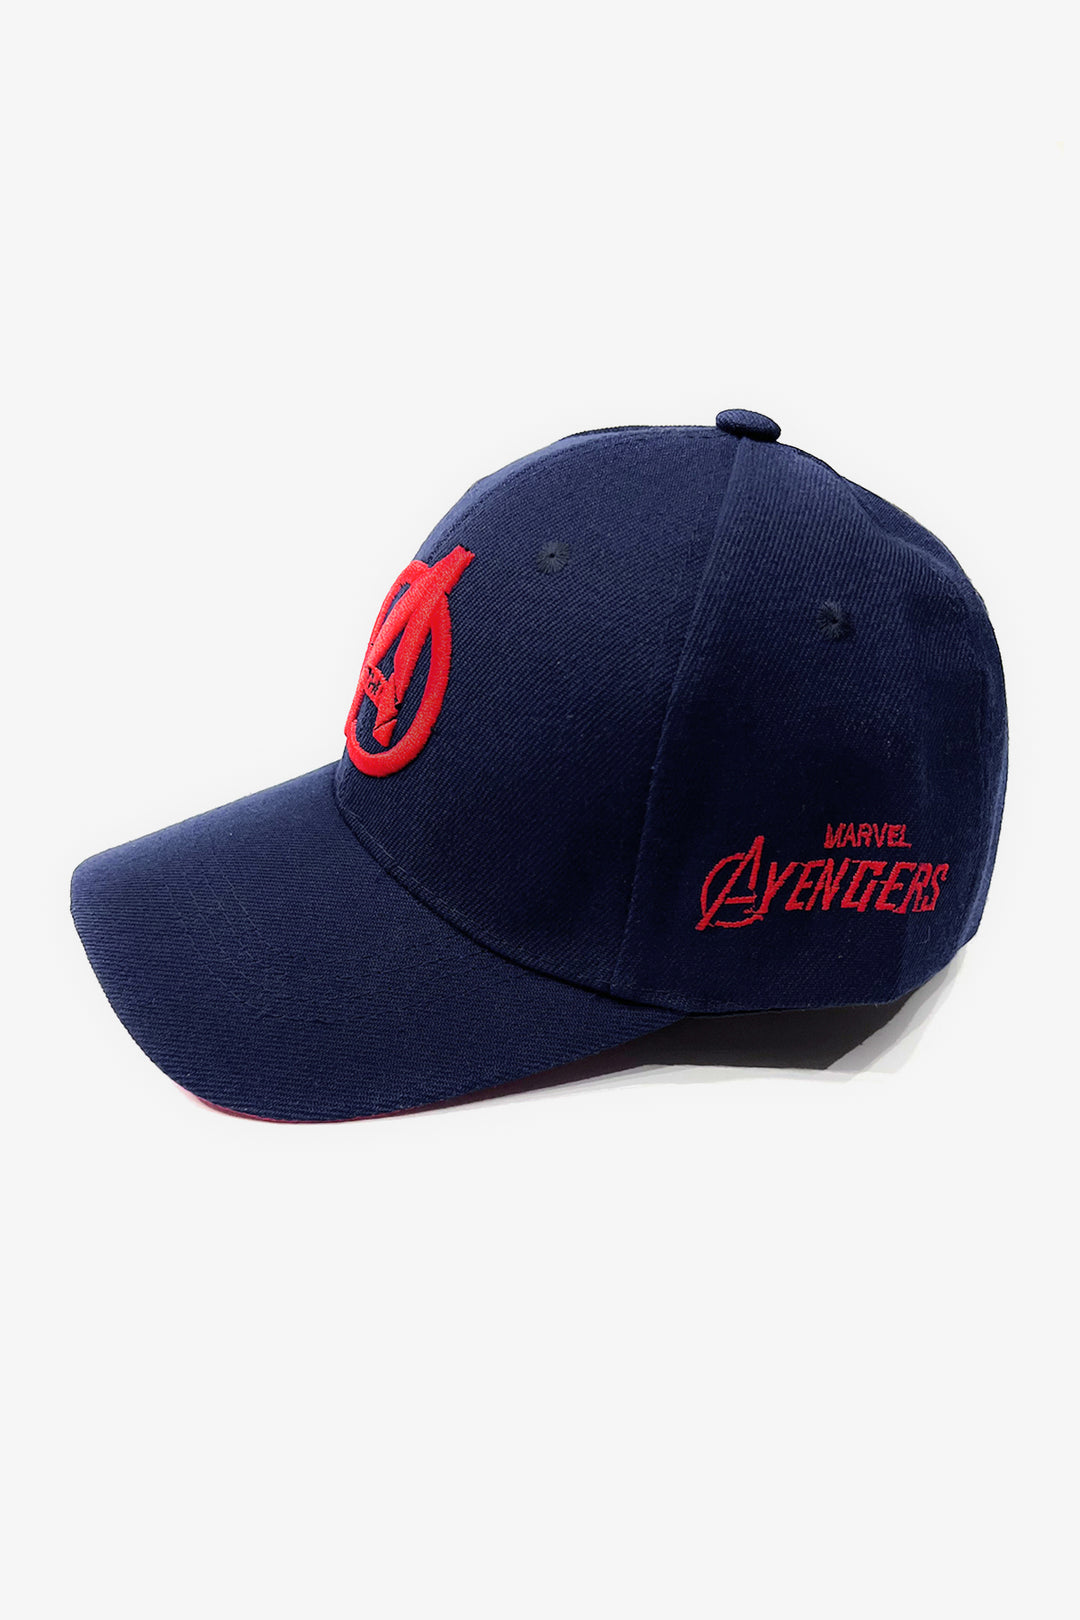 Blue Avengers Embroidered Cap - S23 - MCP099R